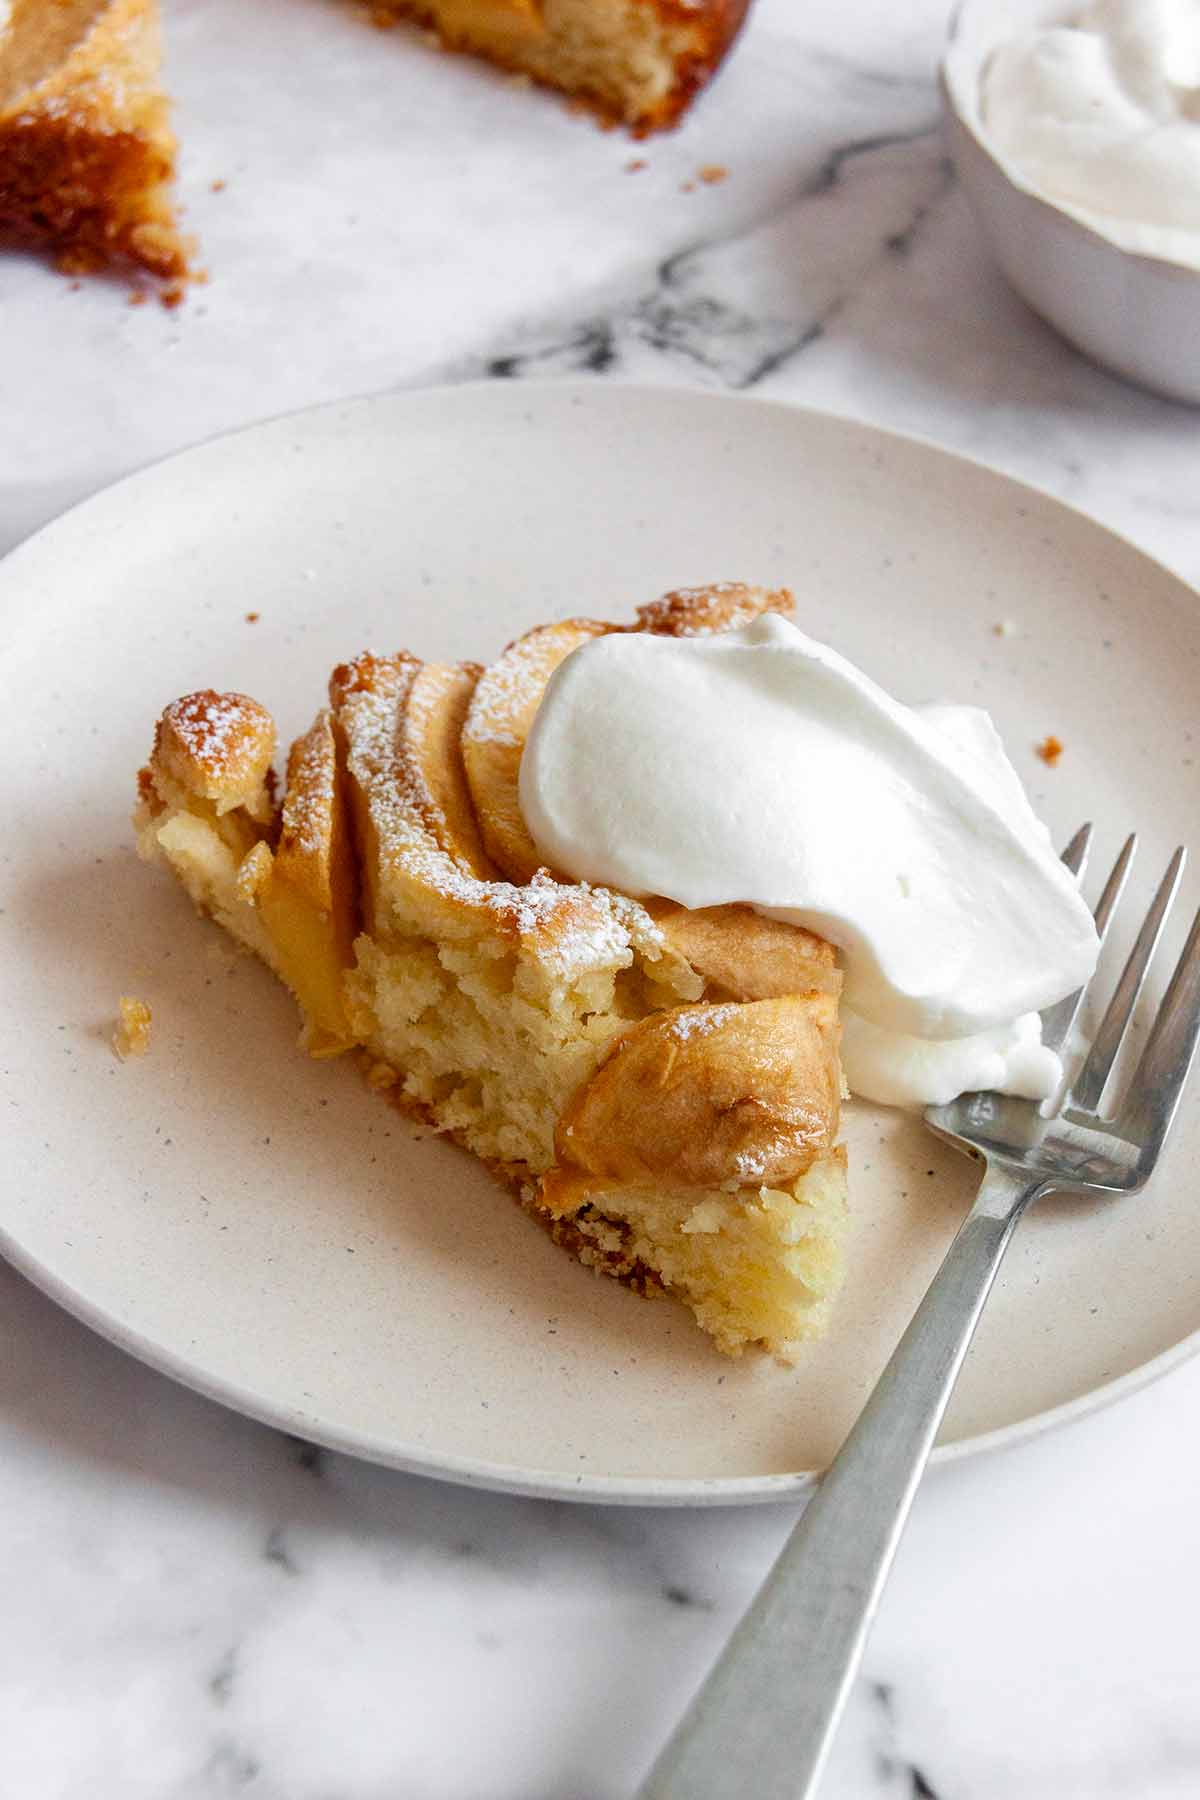 A slice of apple cake with a dollop of whipped cream on top.